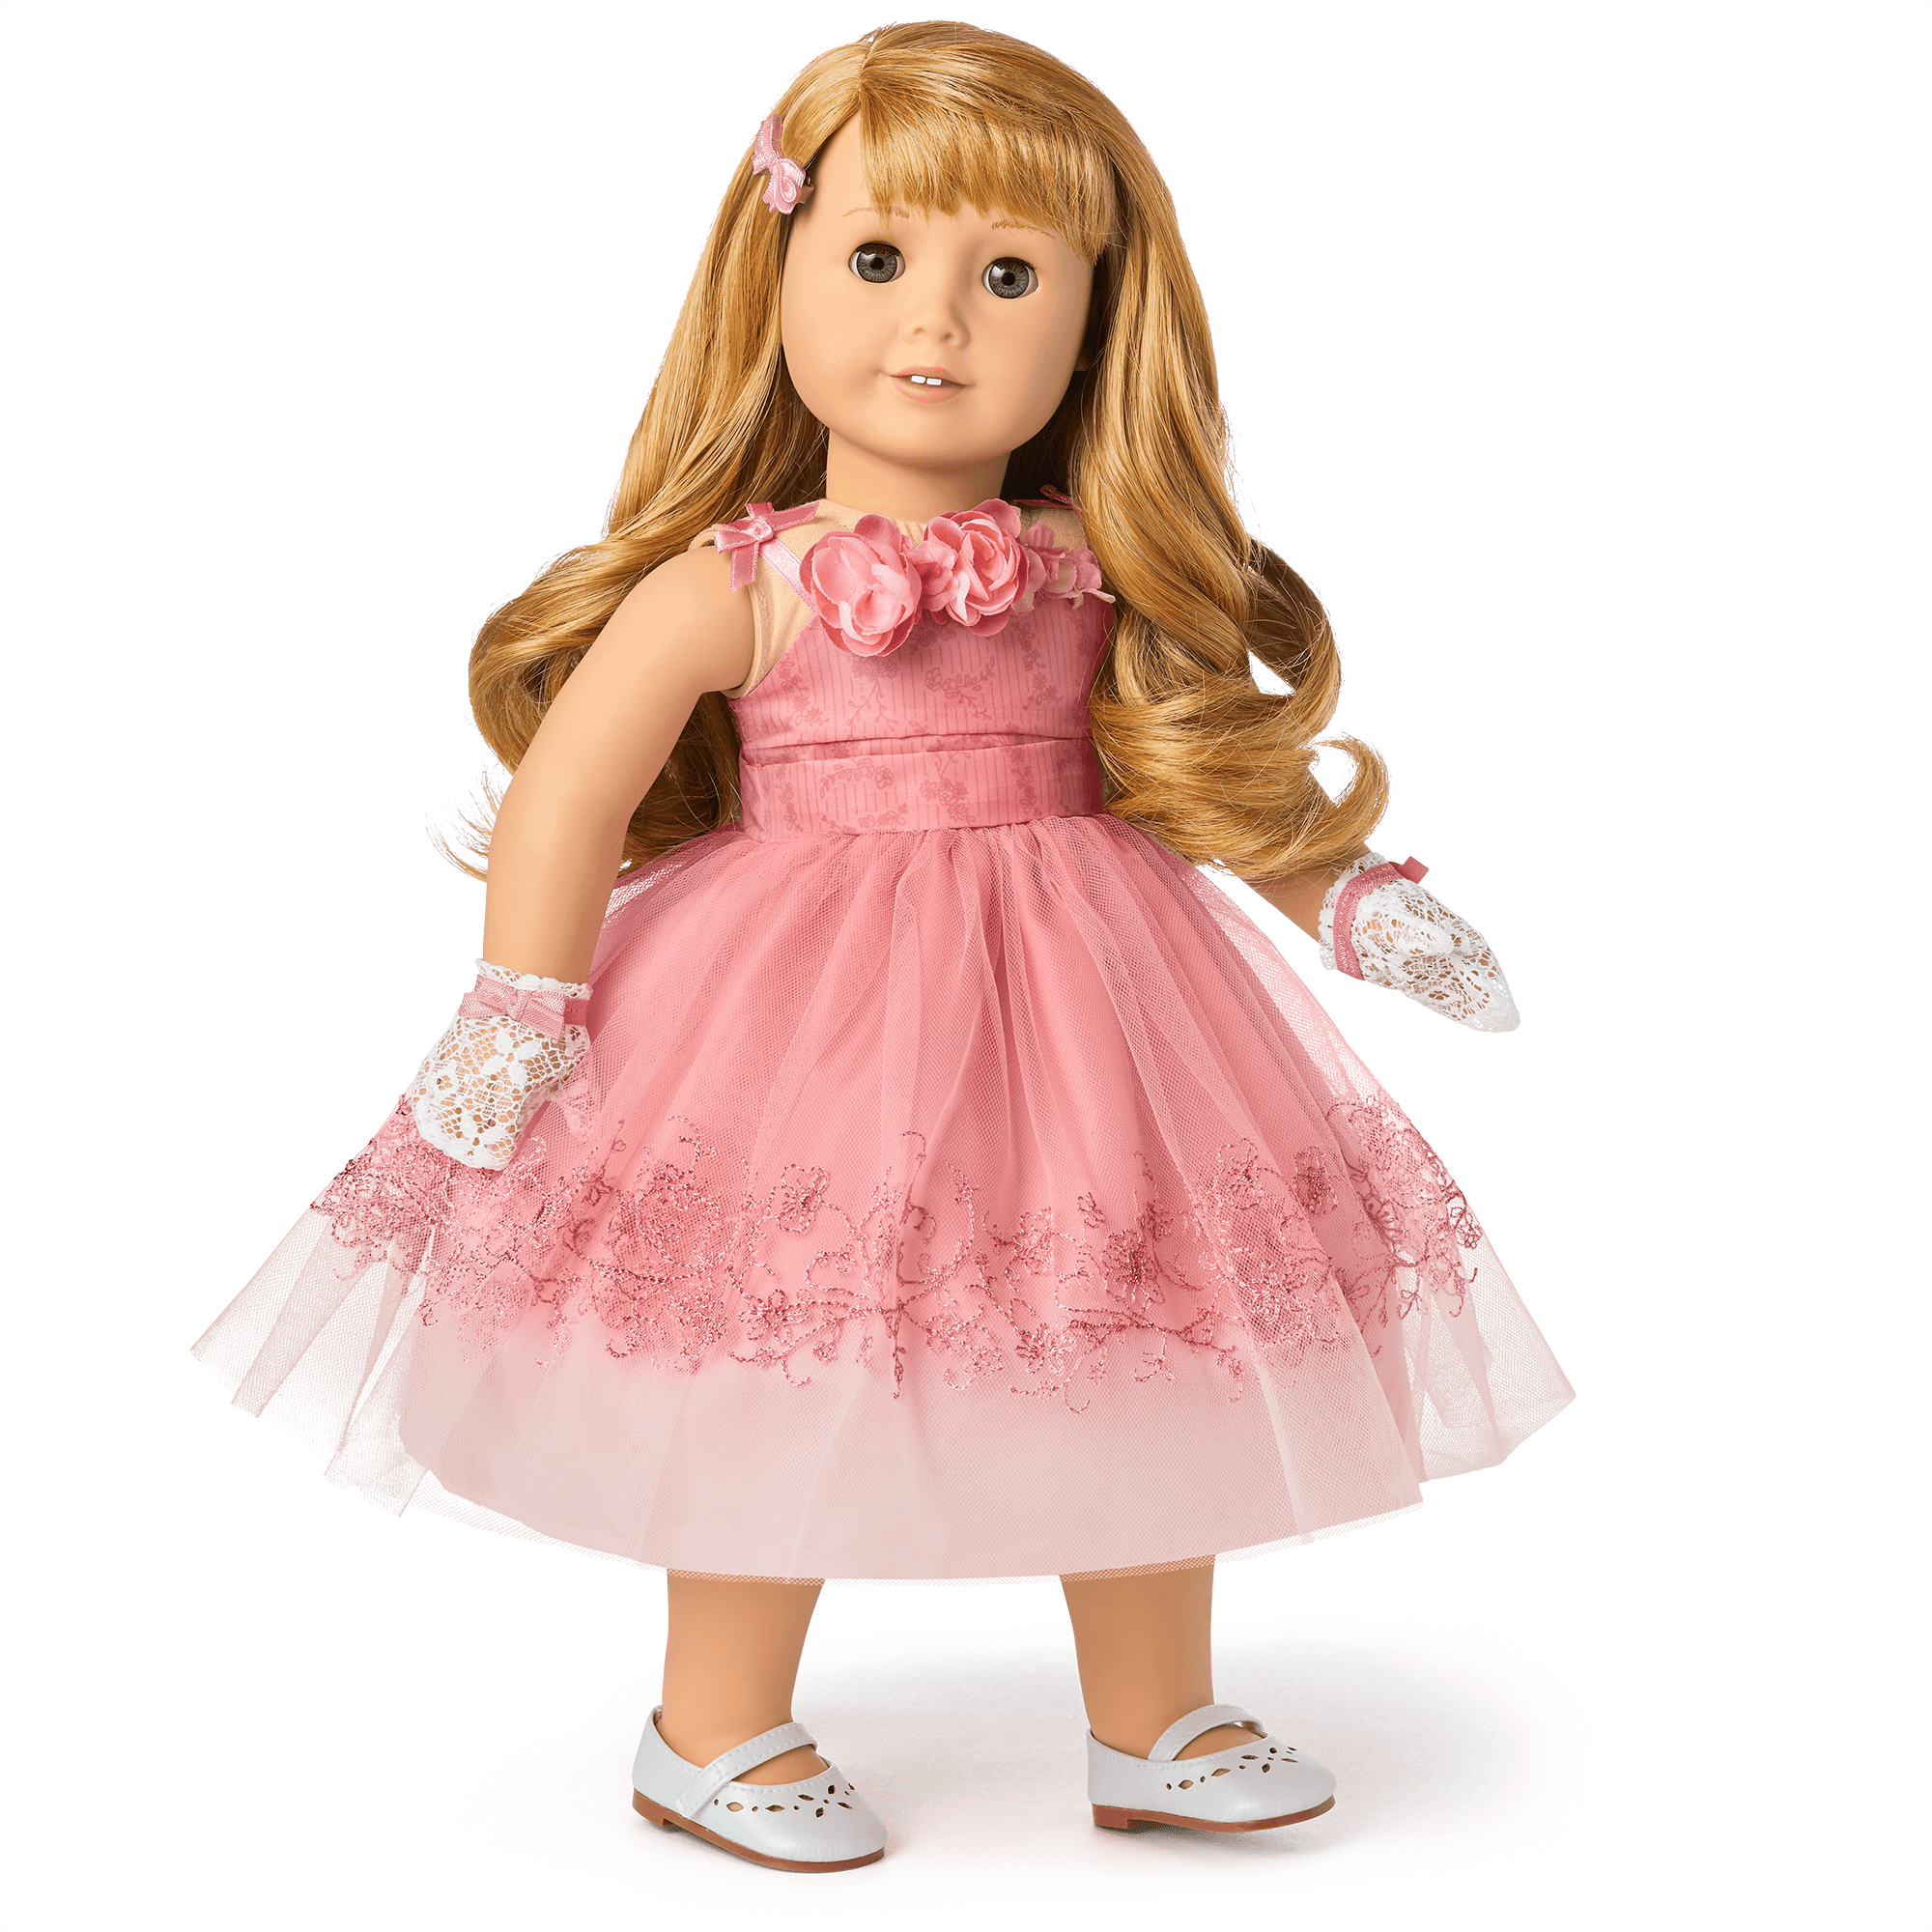 American Girl Truly Me Ballet Practice Accessories for 18 inch Dolls (Doll Not Included), Pink